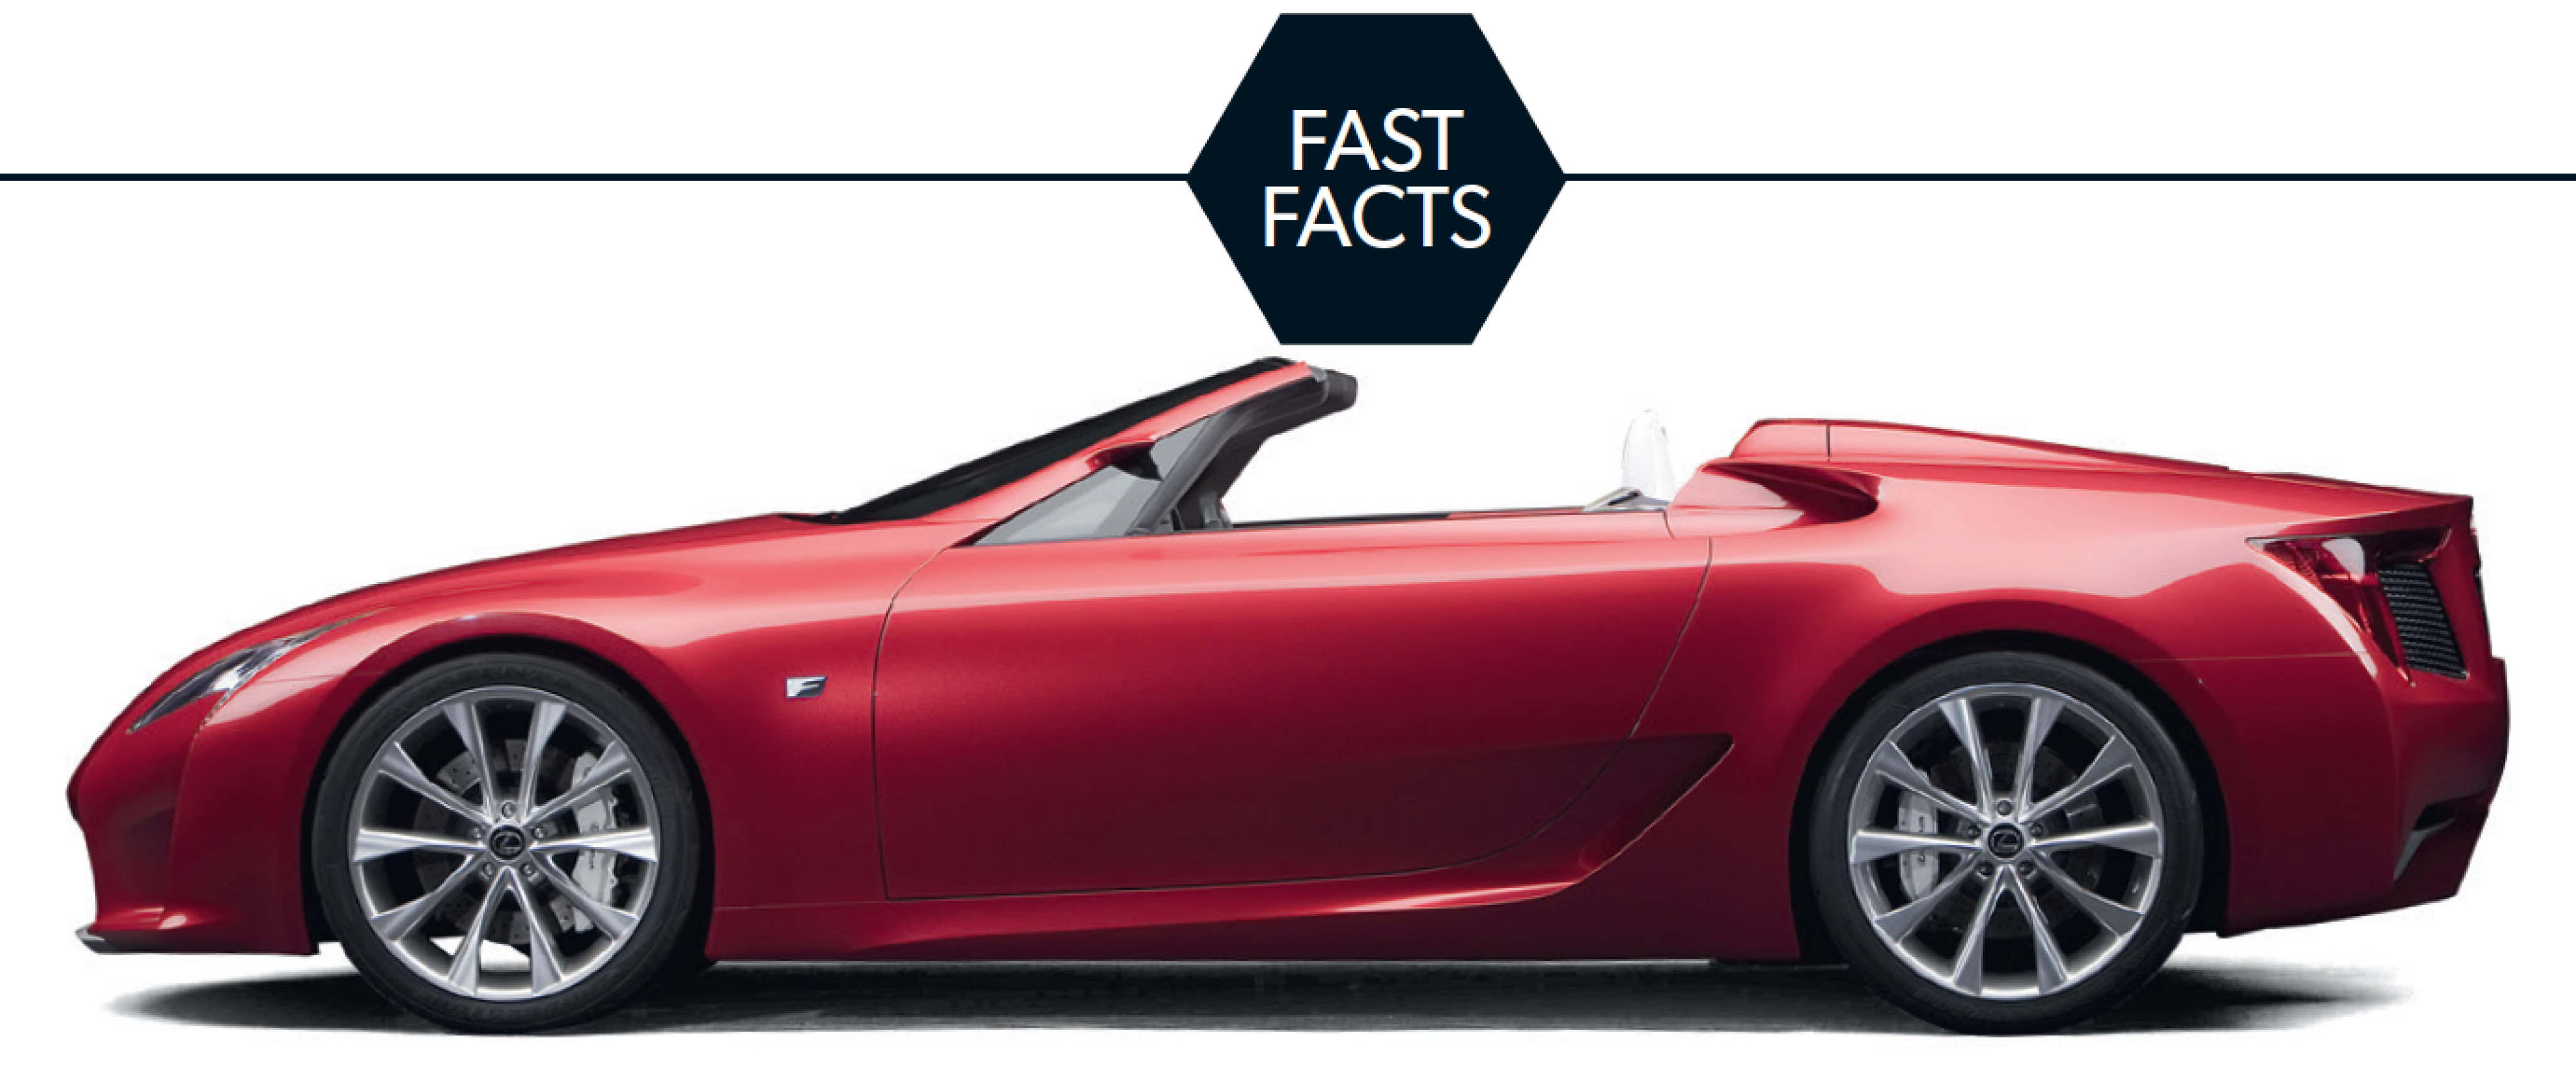 a0c818c5/mag to web lexus lfa convertible fast facts png